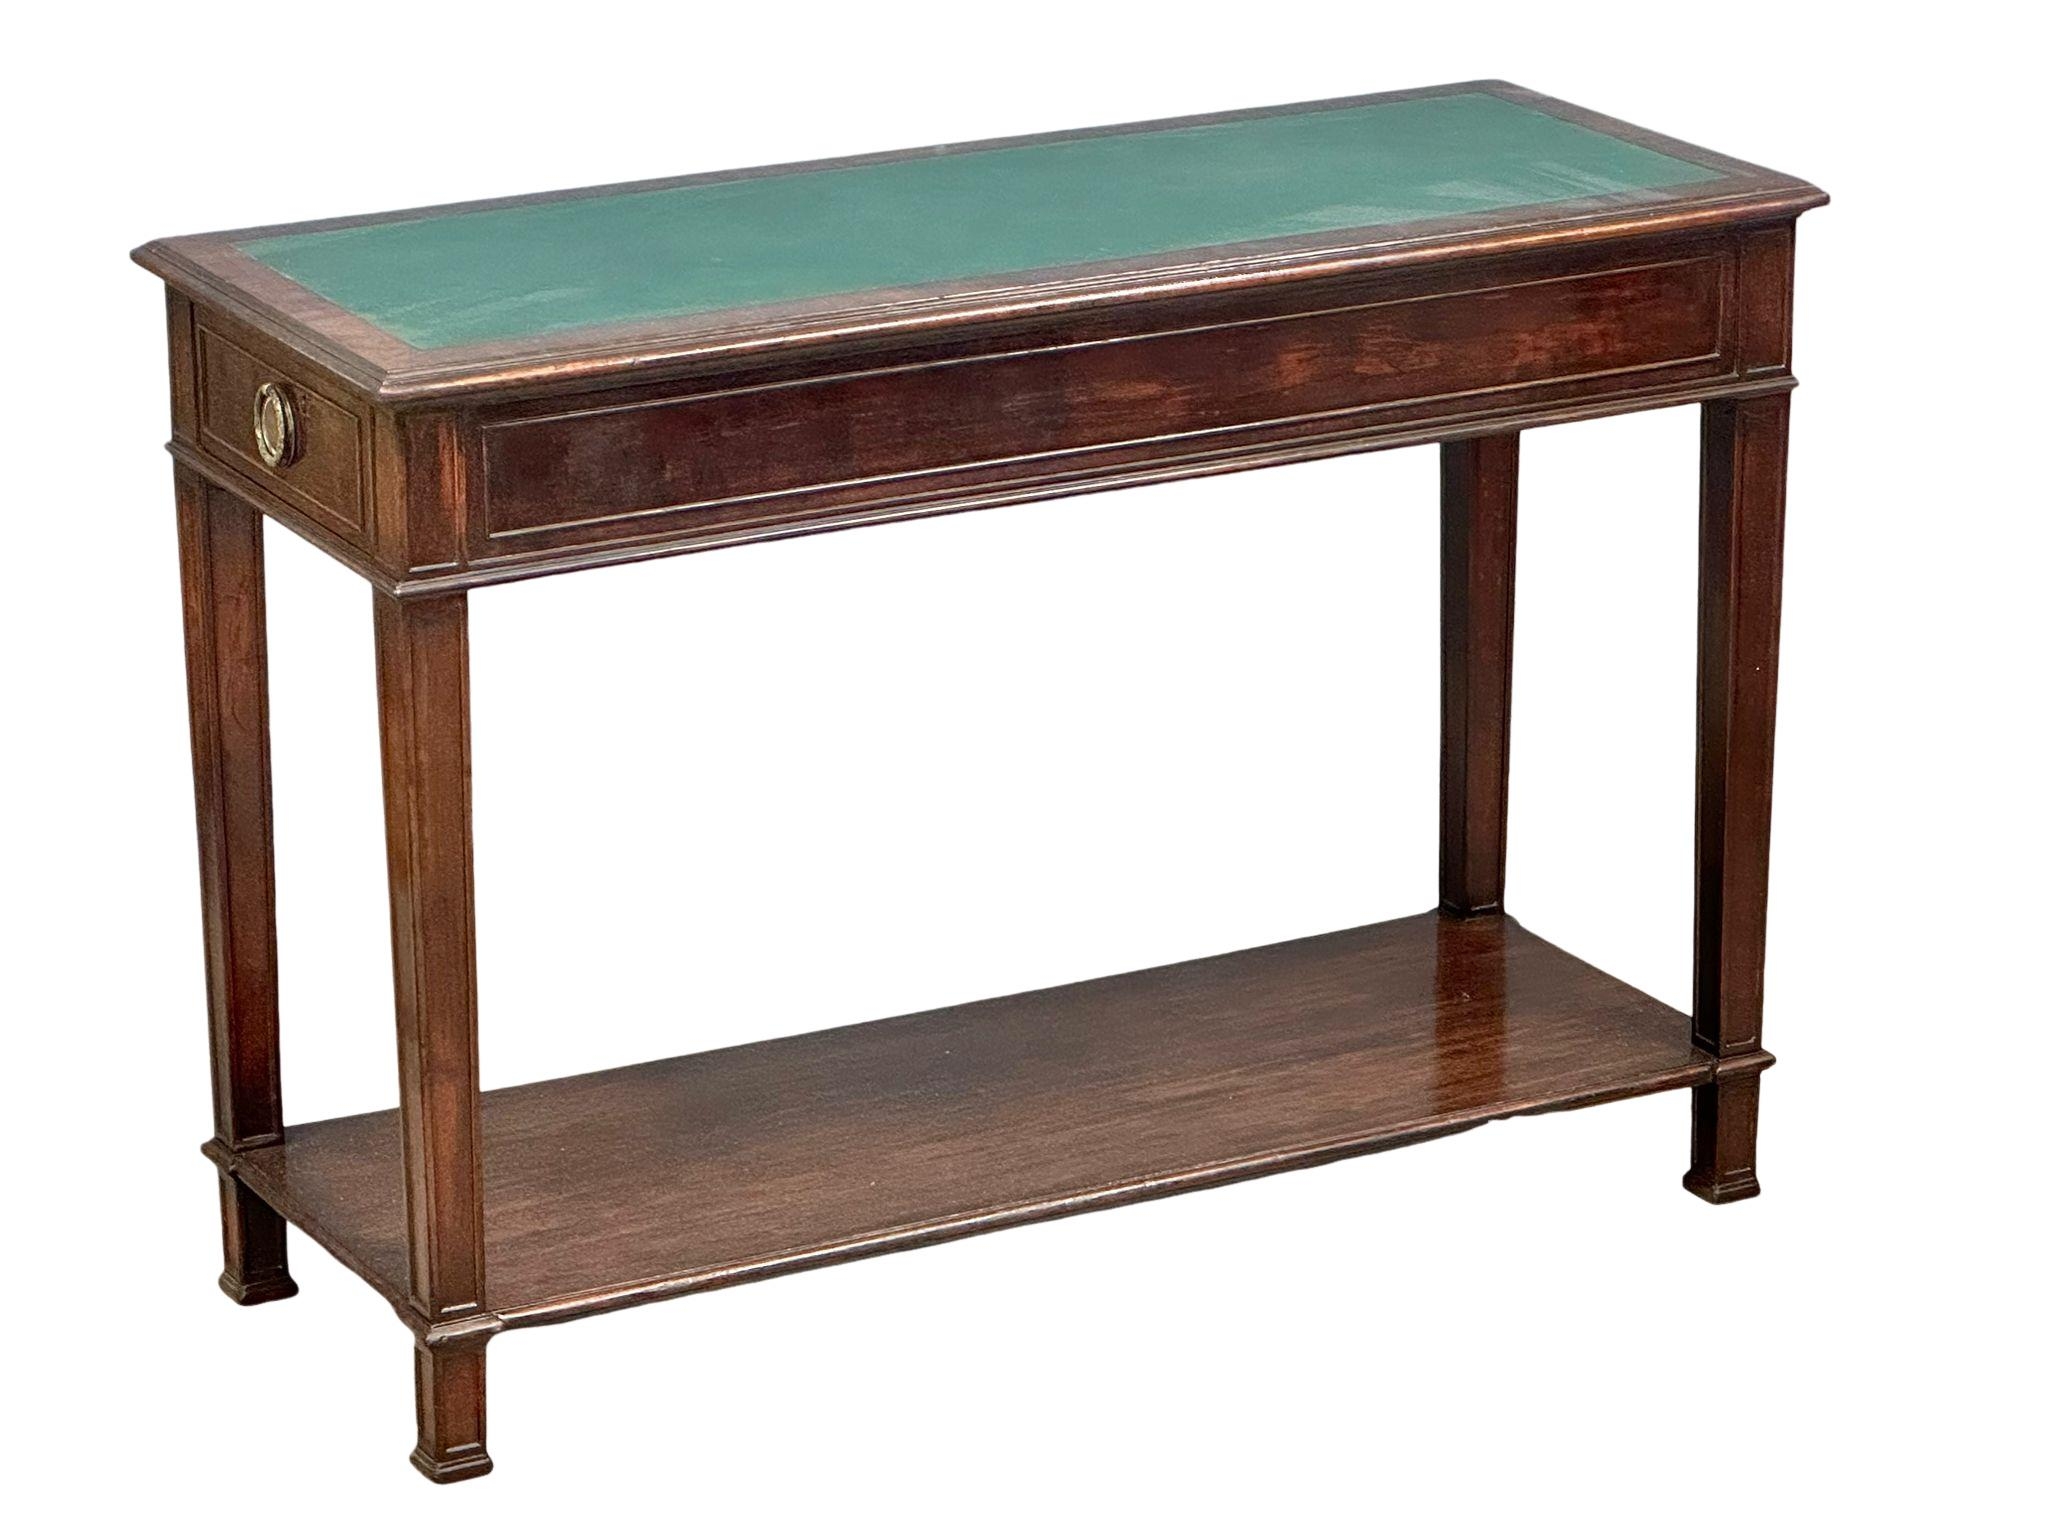 A Robert Adam style late 19th/early 20th century Mahogany side table with two drawers and leather